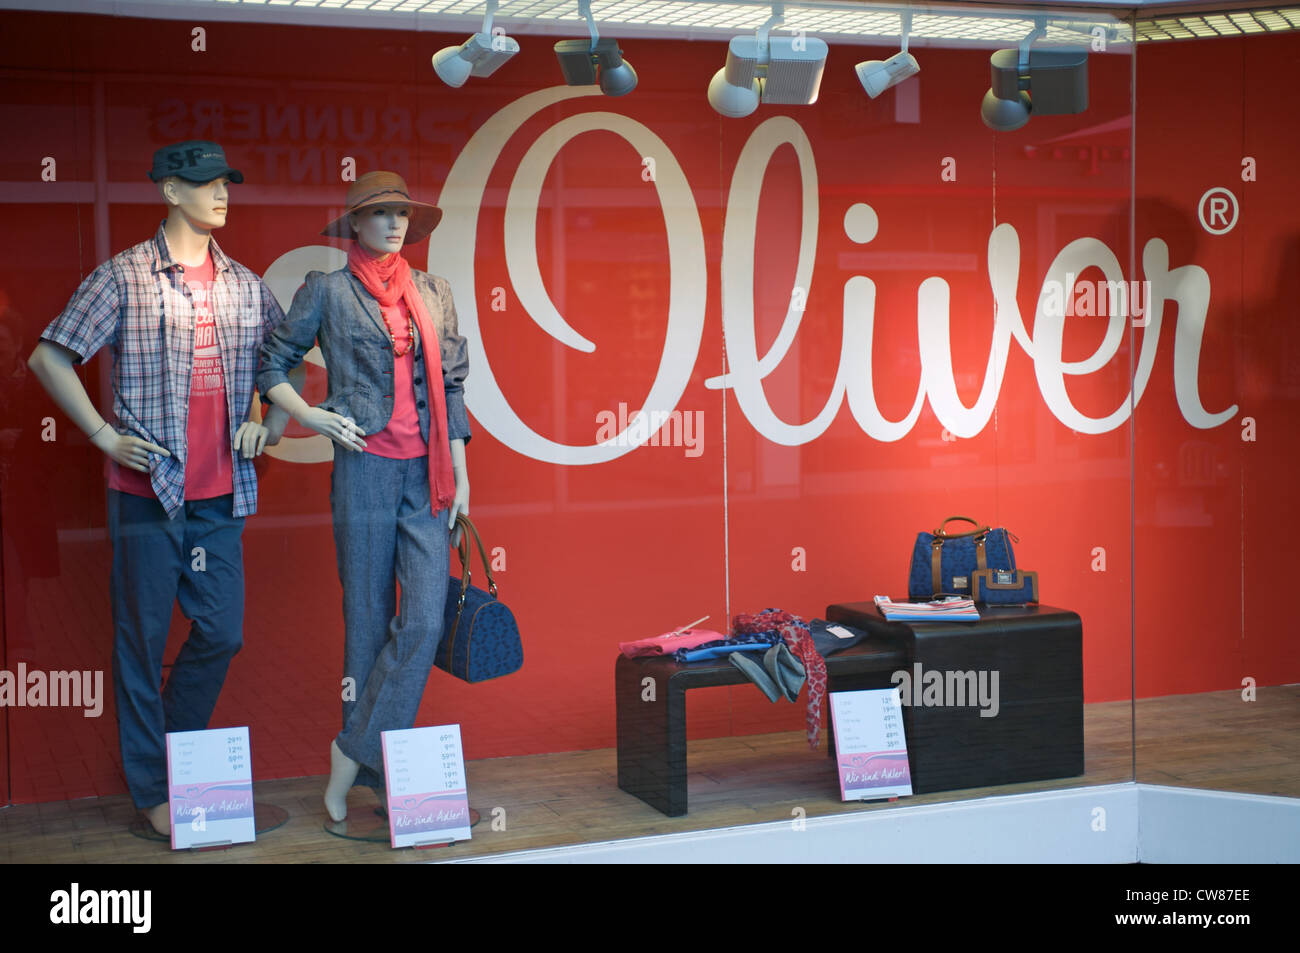 S.Oliver clothes shop Stock Photo